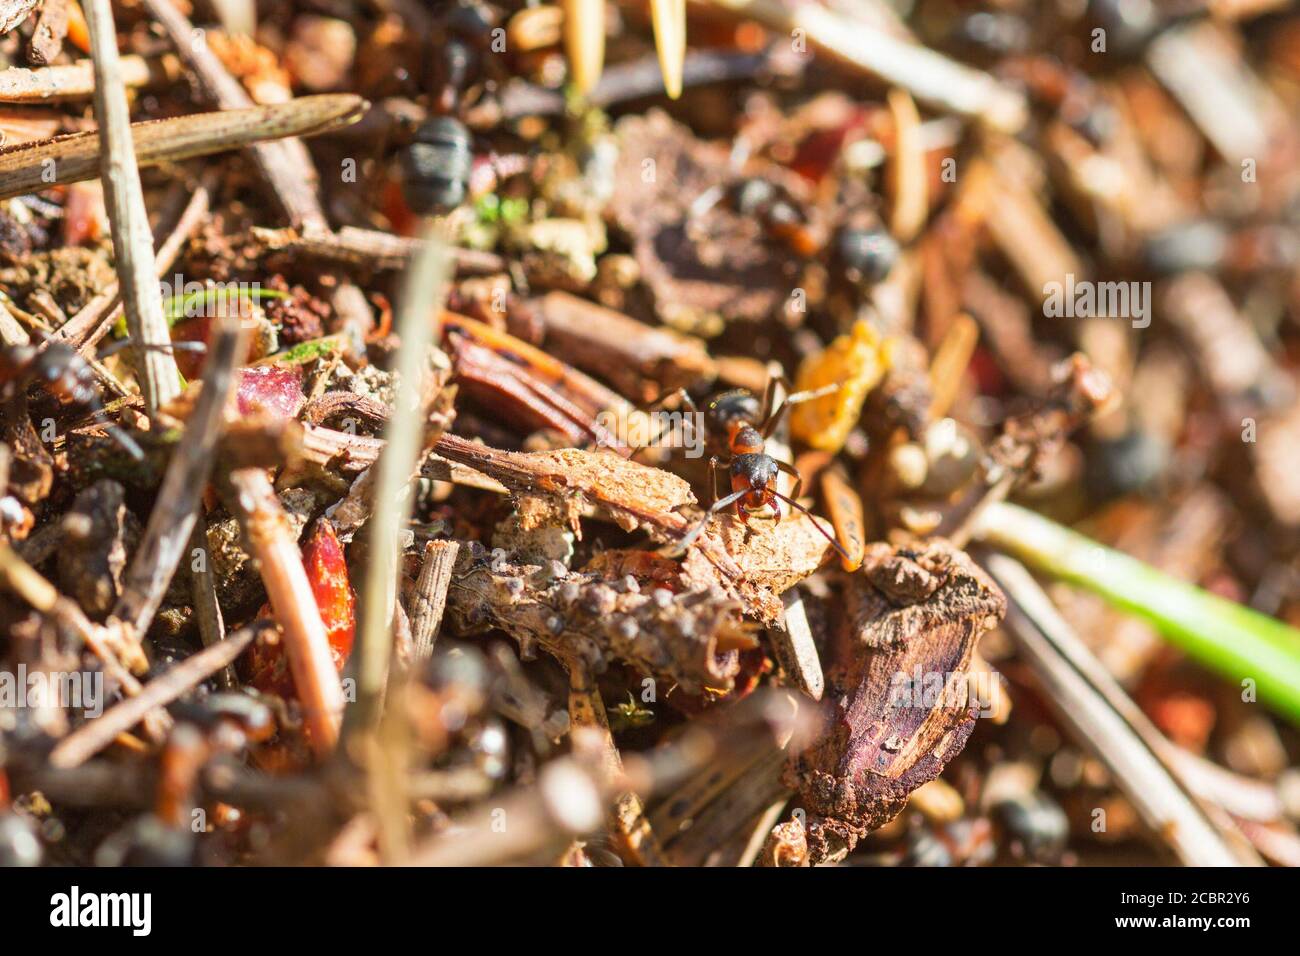 Ants in an ant hill in the woods Stock Photo